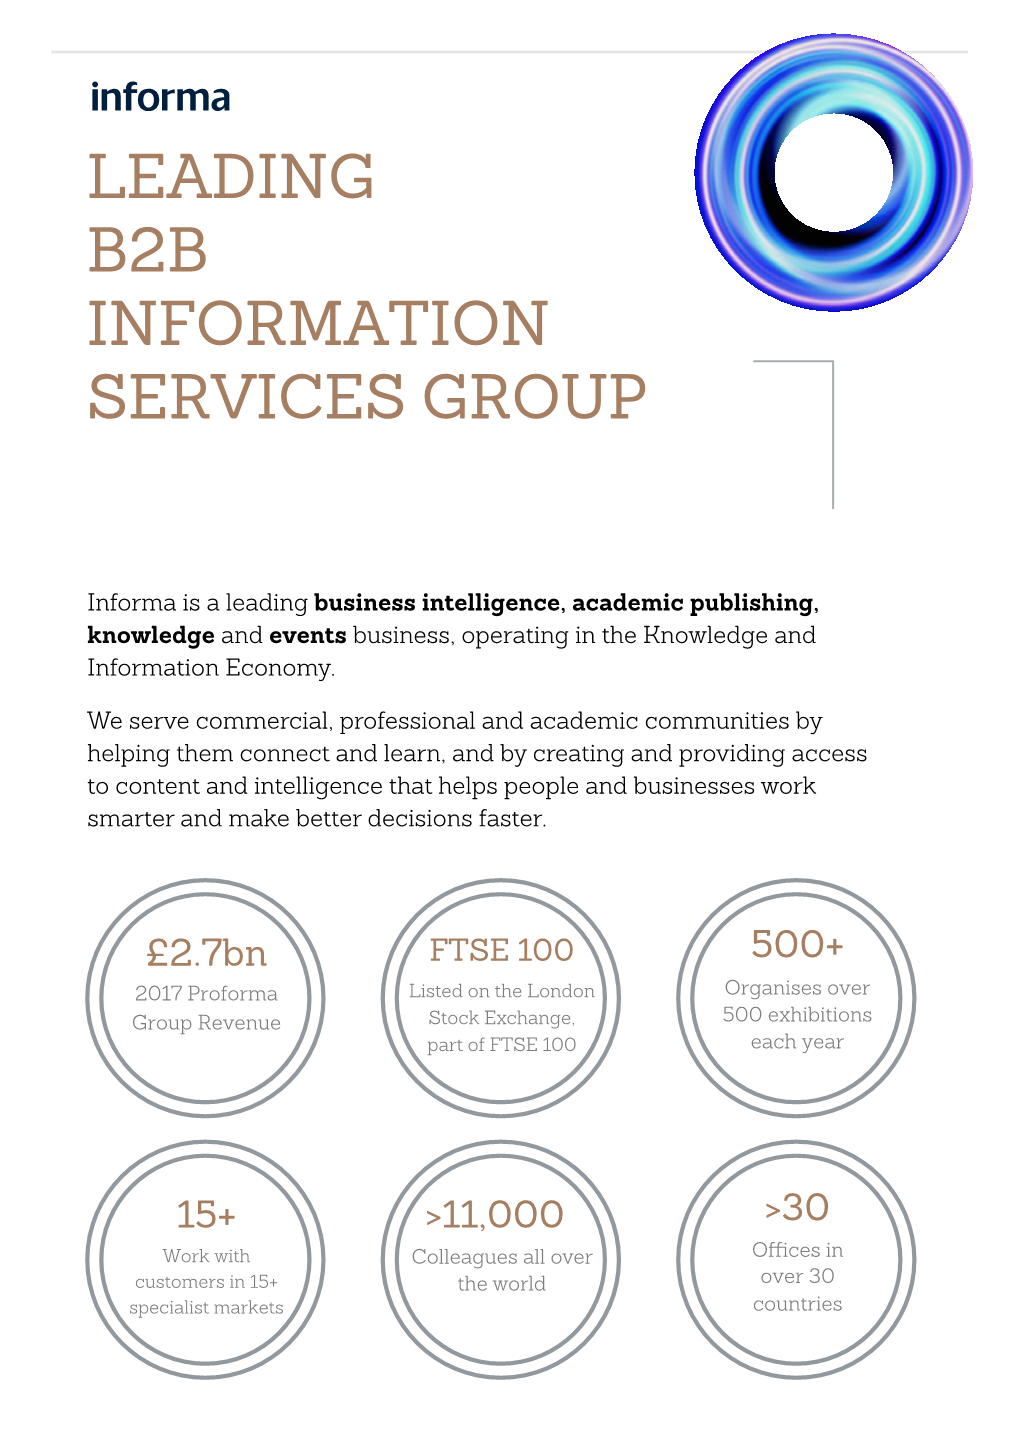 Leading B2b Information Services Group